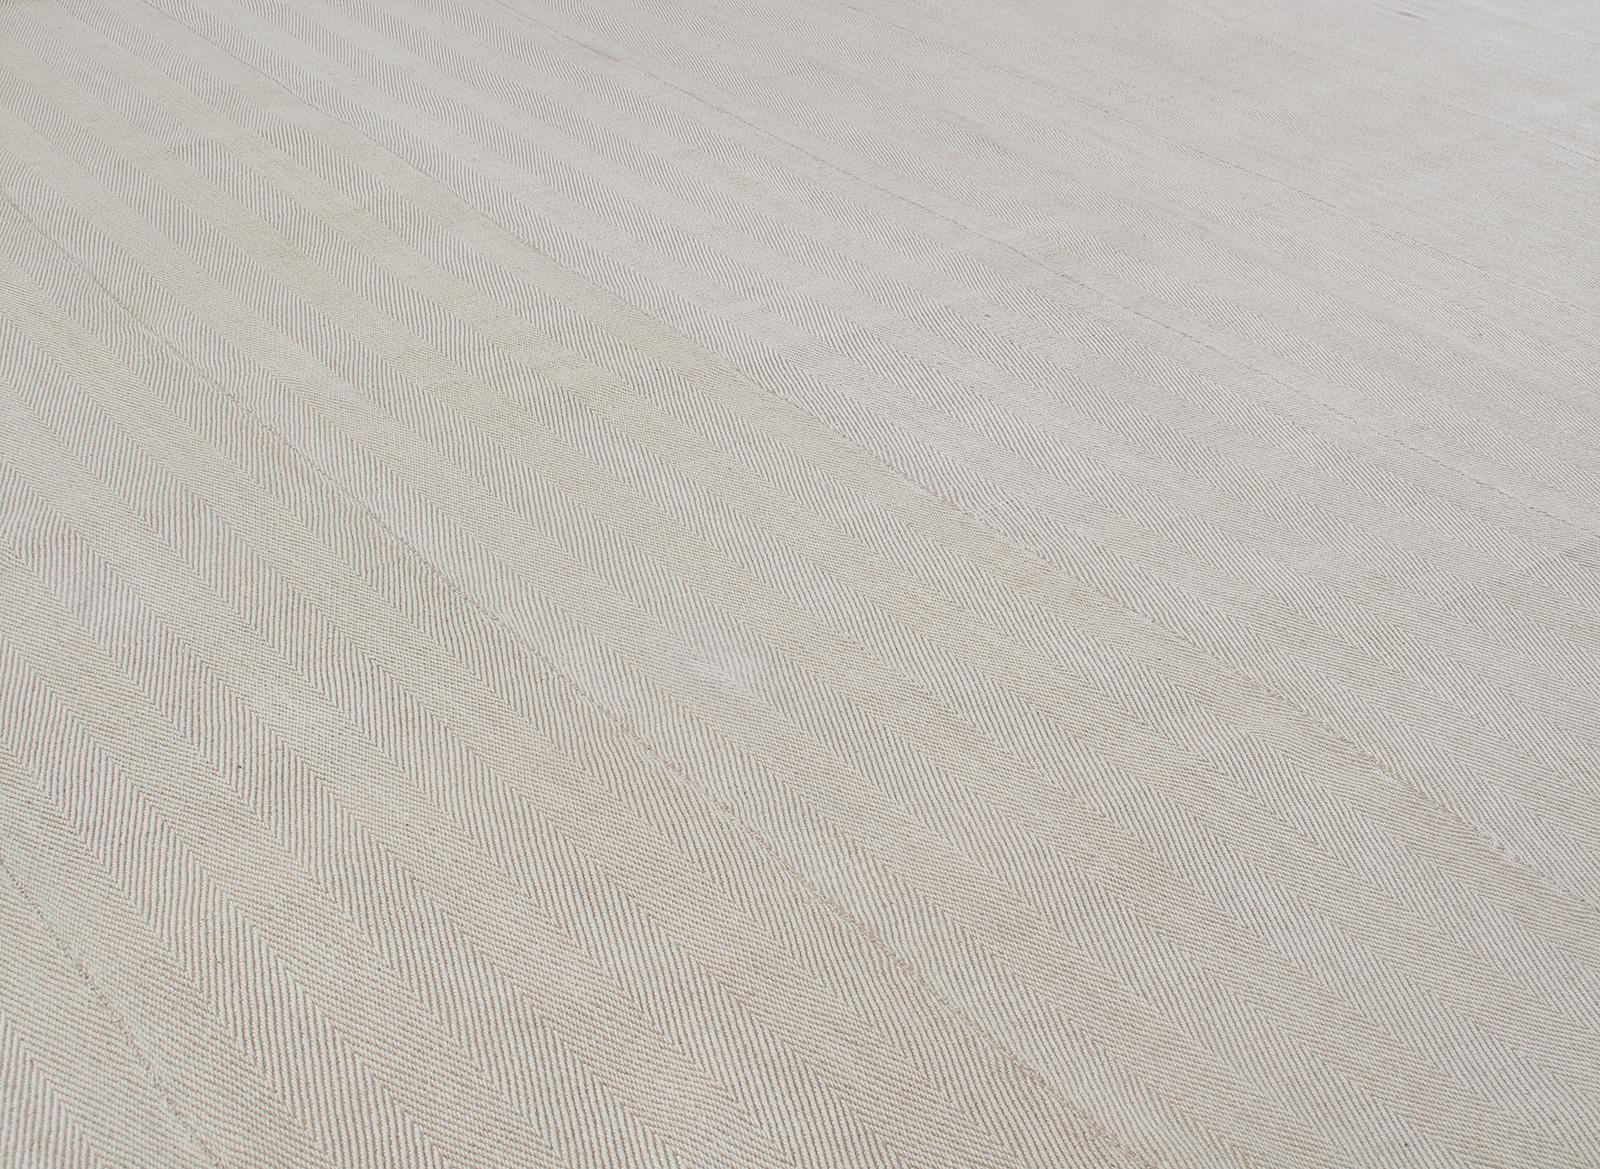 This Persian Pelas flat-weave rug is made in Iran with the finest hand-carded, hand-spun wool. The subtle palette is a product of all natural dyes taken from regional plants and minerals. Nasiri practices low impact manufacturing processes while